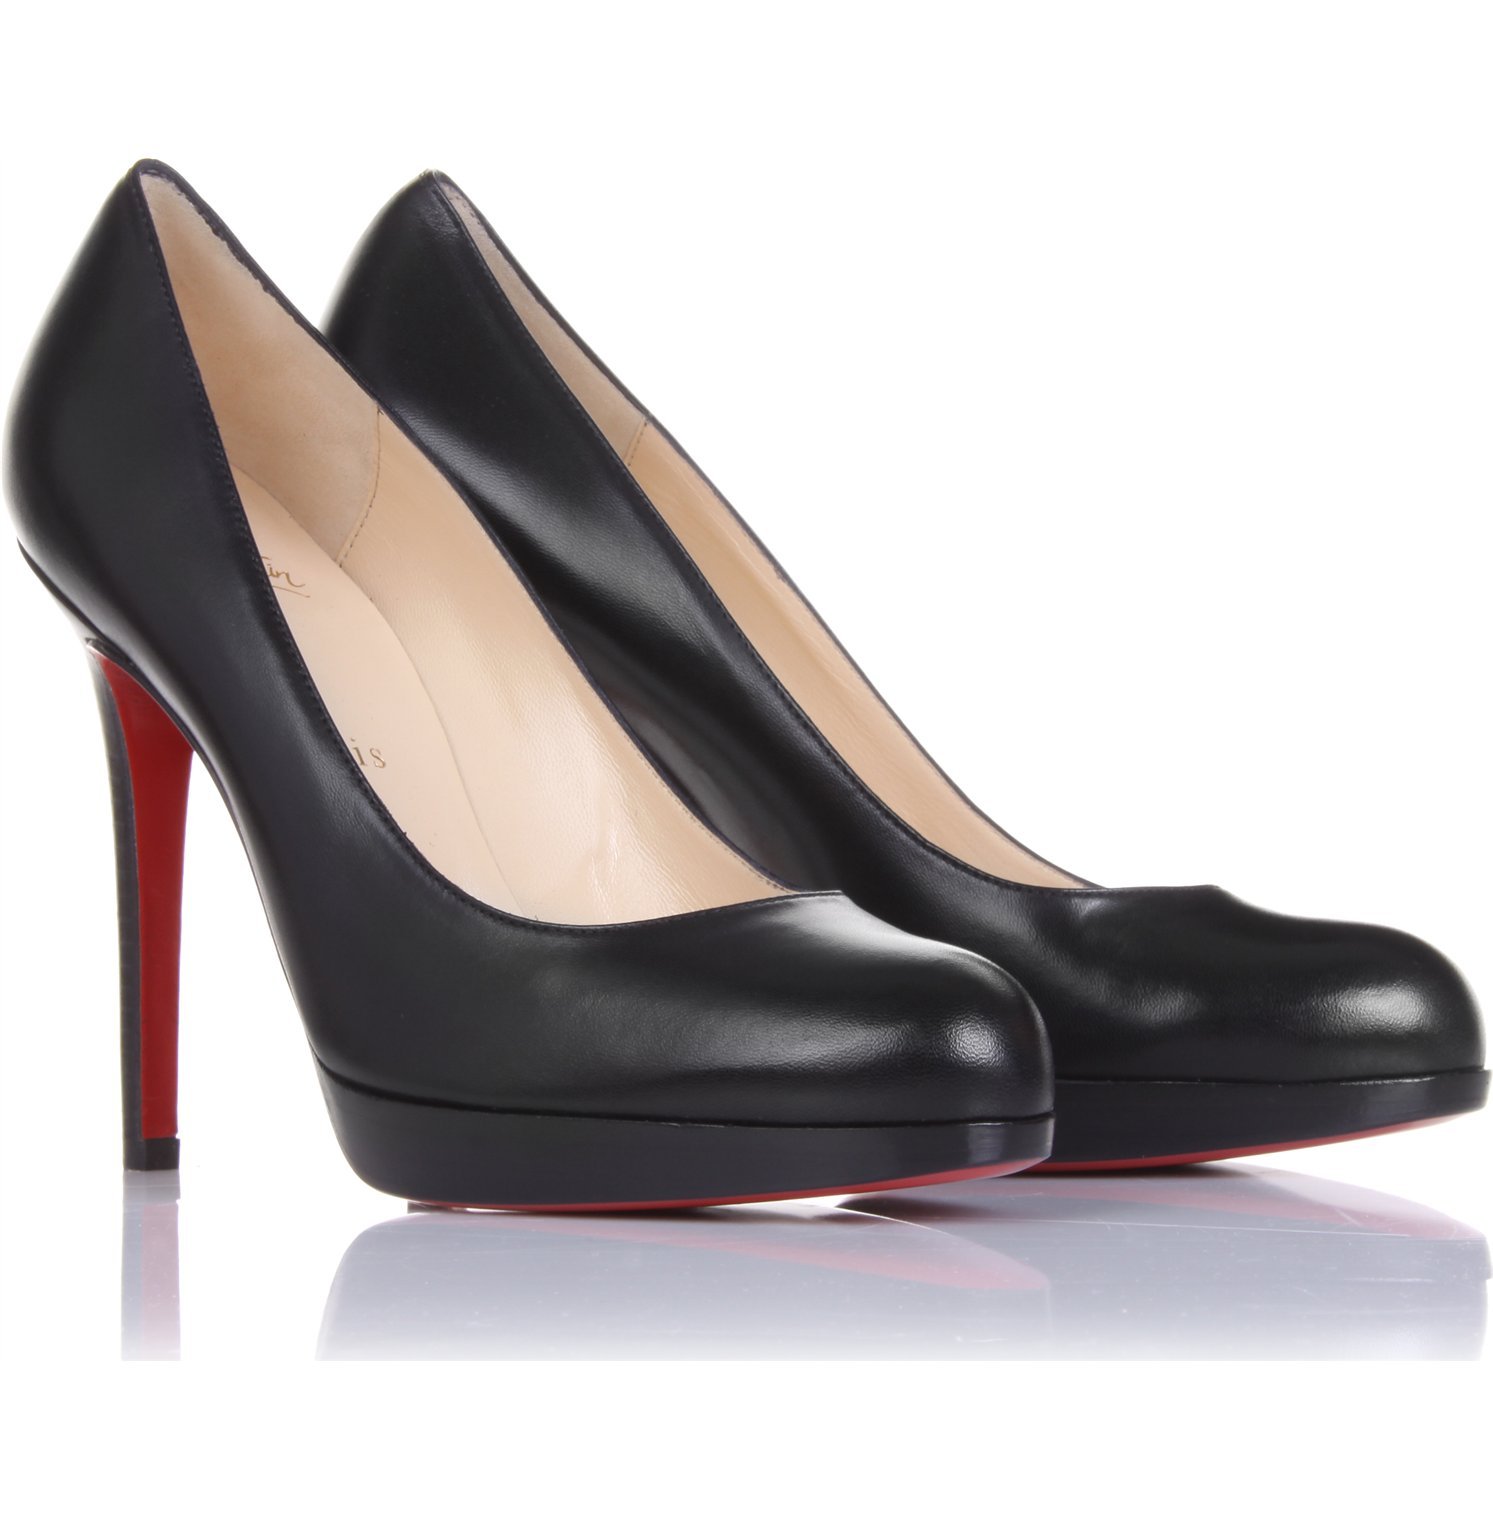 christian louboutin imitations - christian louboutin New Simple round-toe pumps Black leather | The ...